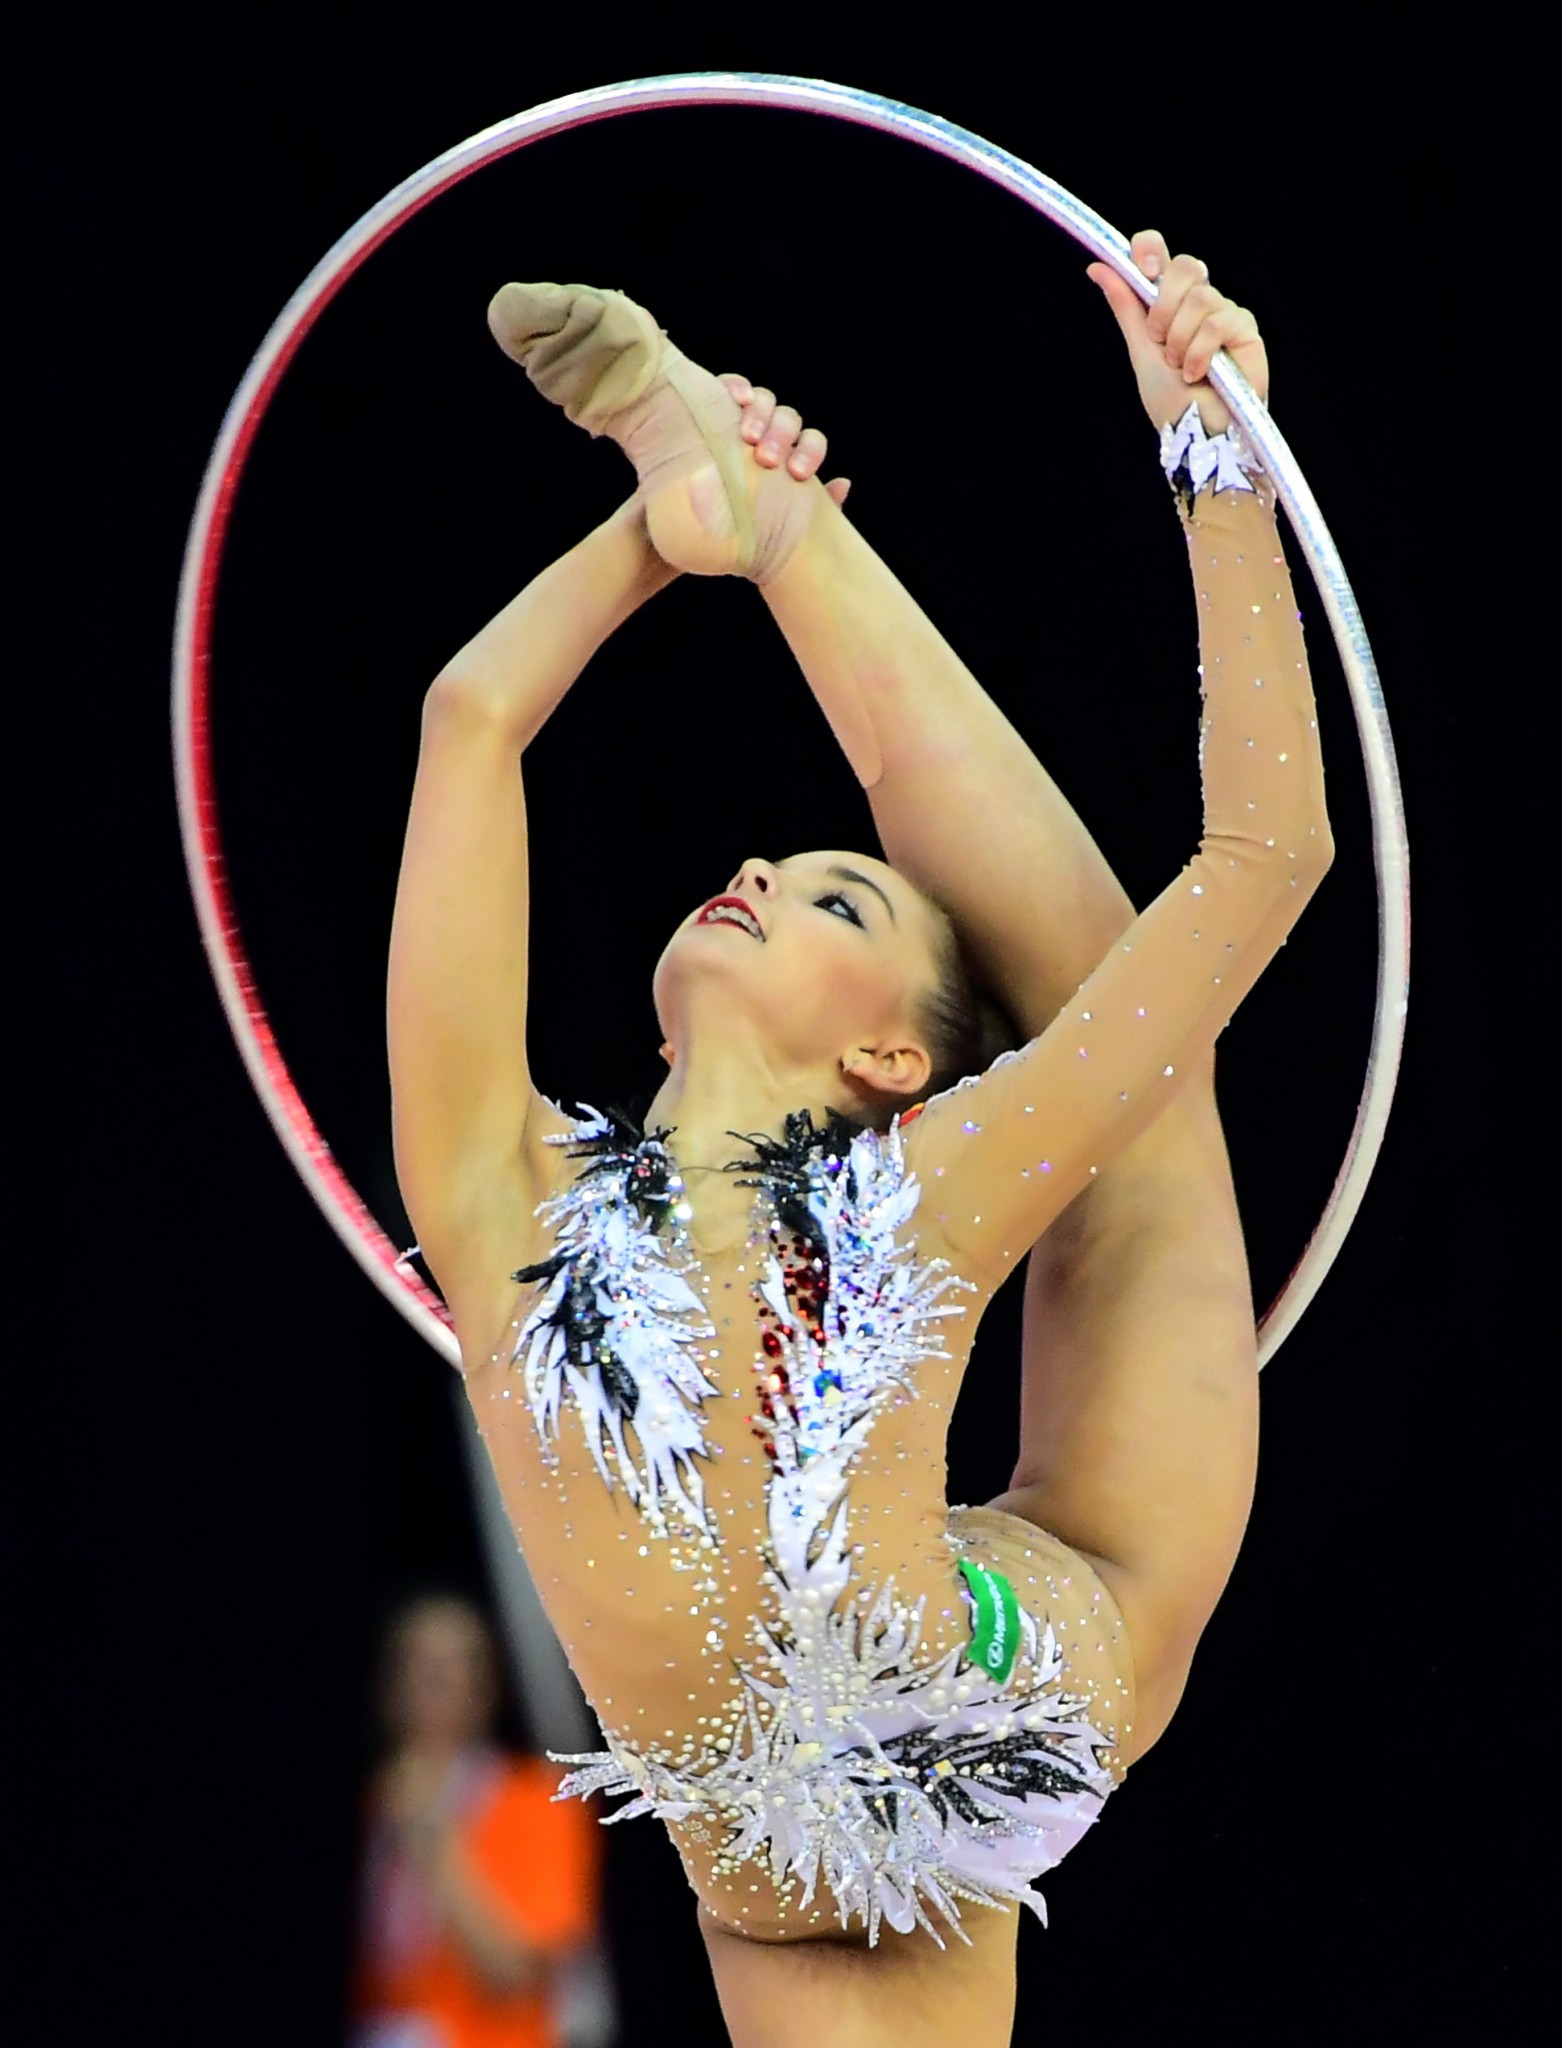 Russian identical twins both bag gold and silver at FIG Rhythmic World Championships